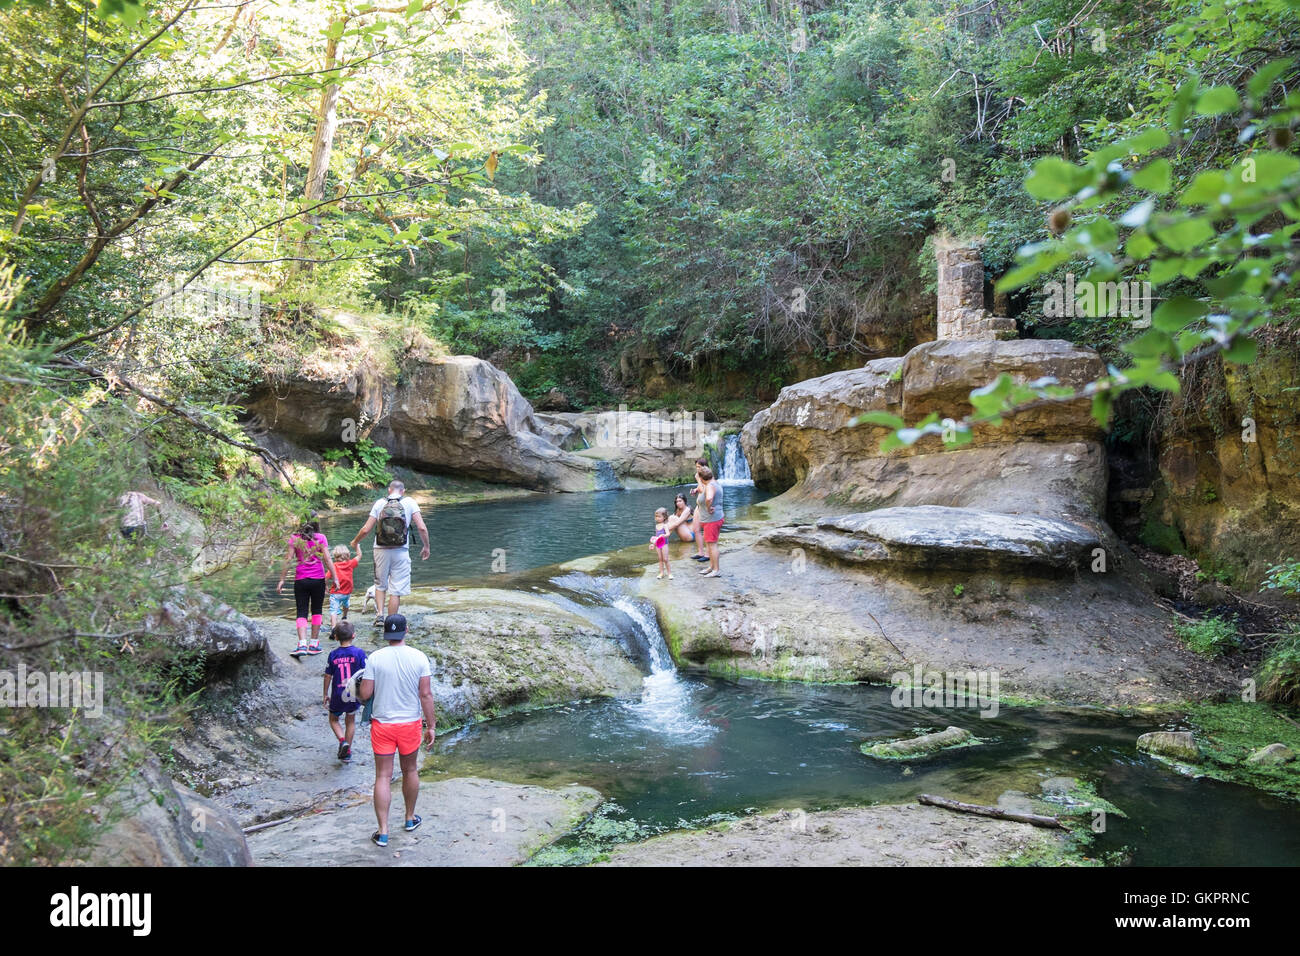 Near Bugarach. Waterfall,cooling stream river in valley during hot summer. Stock Photo